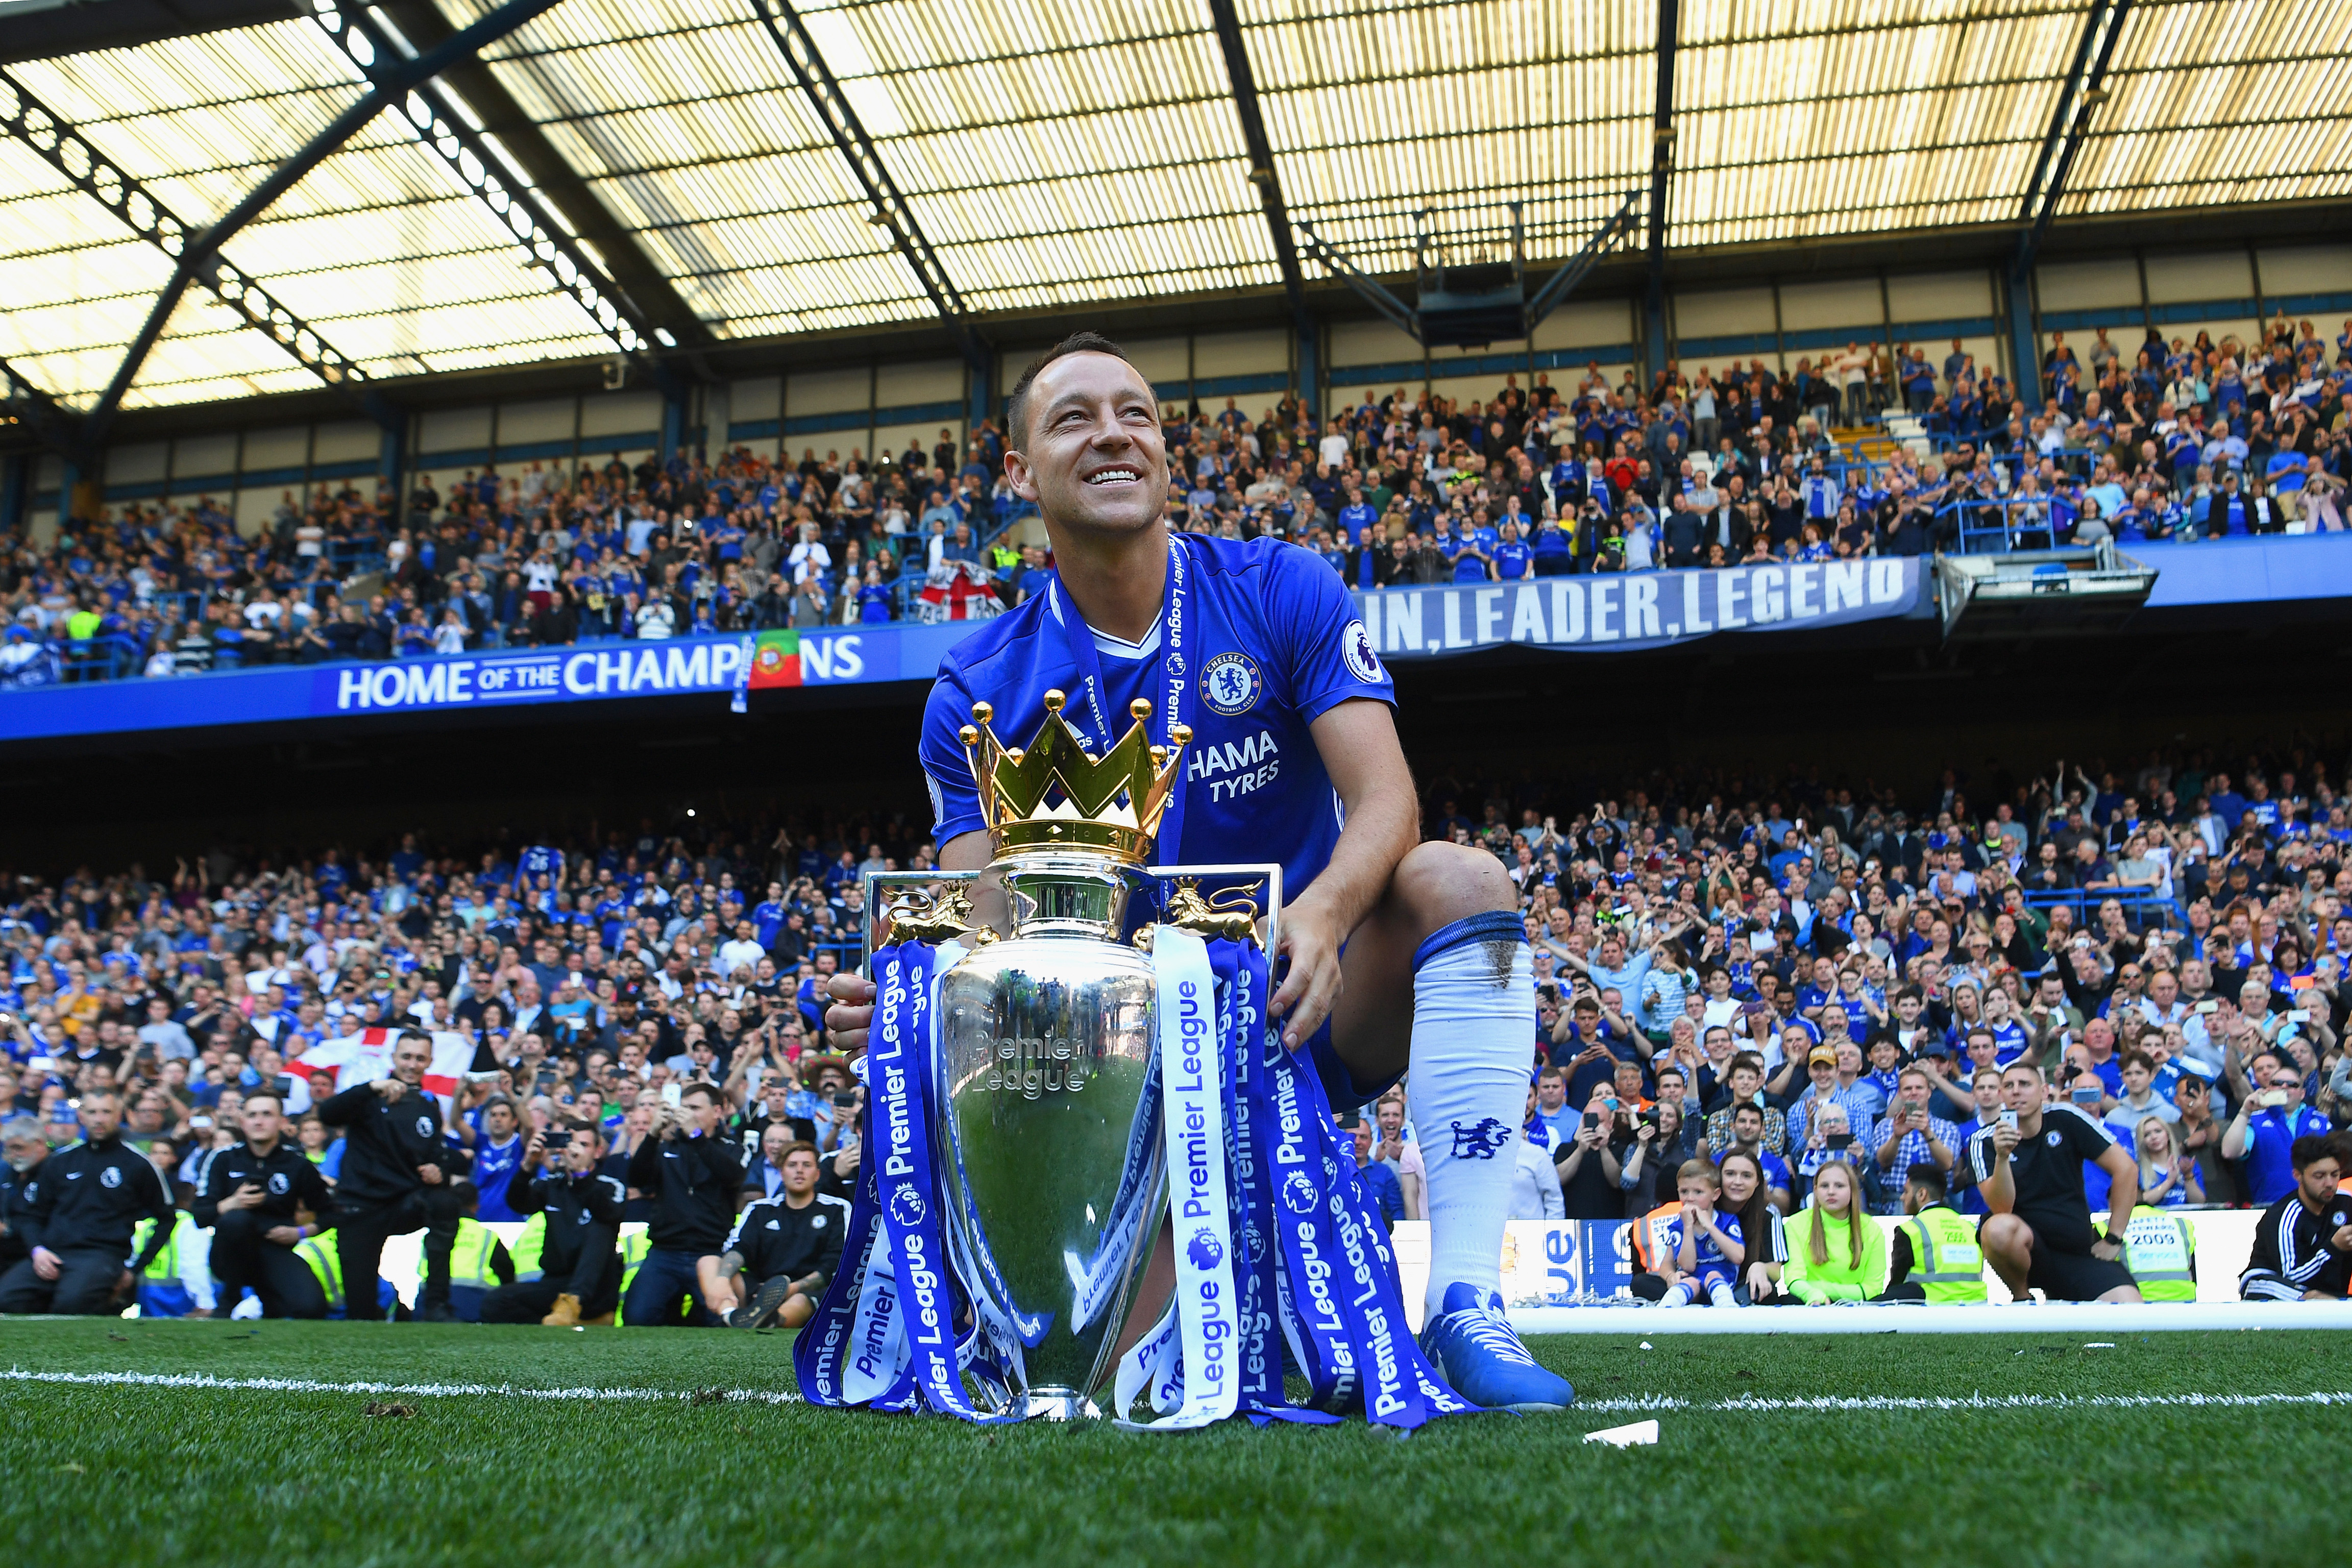 LONDON, ENGLAND - MAY 21:  John Terry of Chelsea poses with the Premier League Trophy after the Premier League match between Chelsea and Sunderland at Stamford Bridge on May 21, 2017 in London, England.  (Photo by Michael Regan/Getty Images)